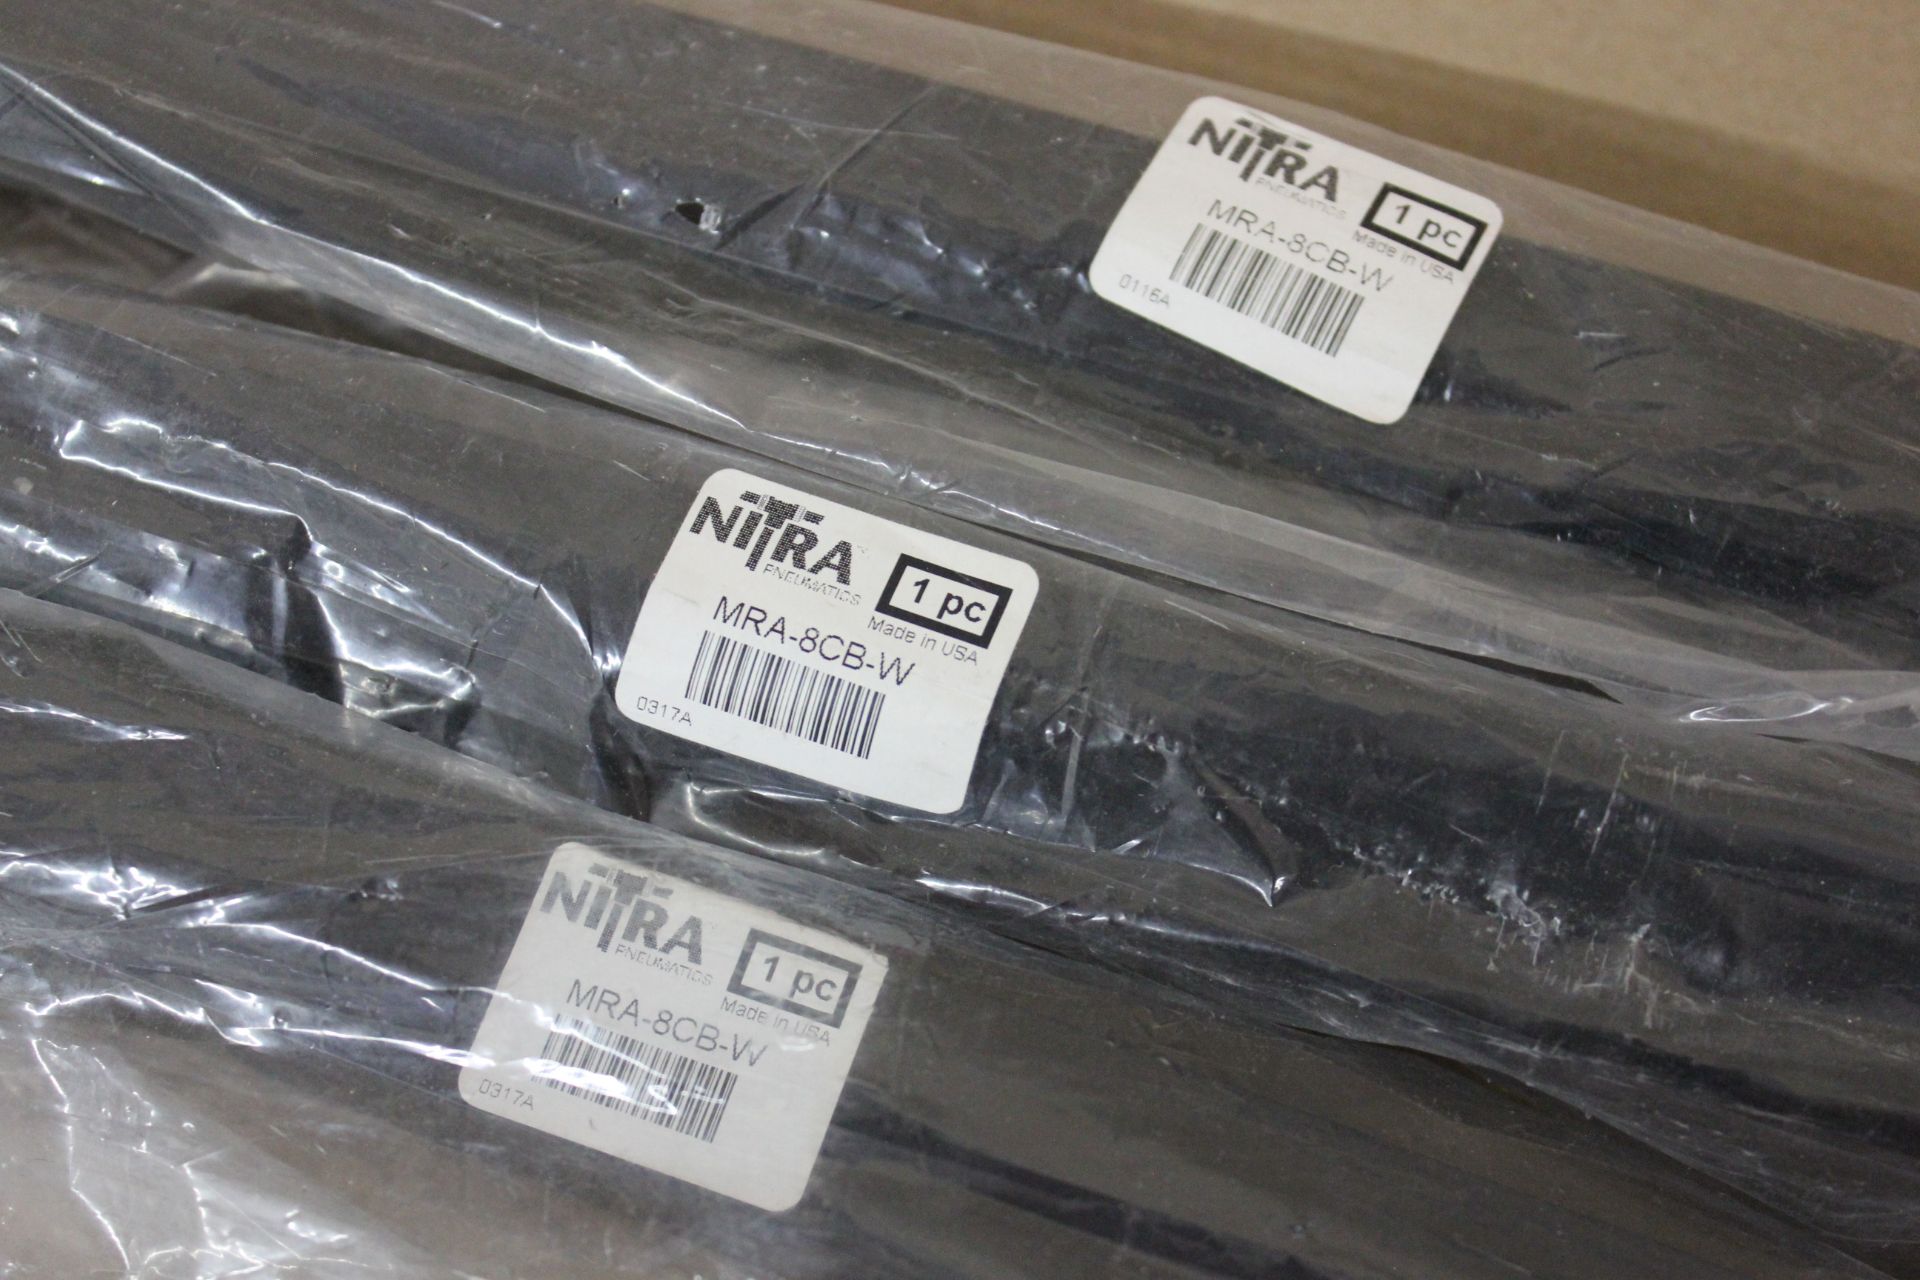 LOT OF NEW NITRA PNEUMATIC VALVE MANIFIOLDS - Image 3 of 3